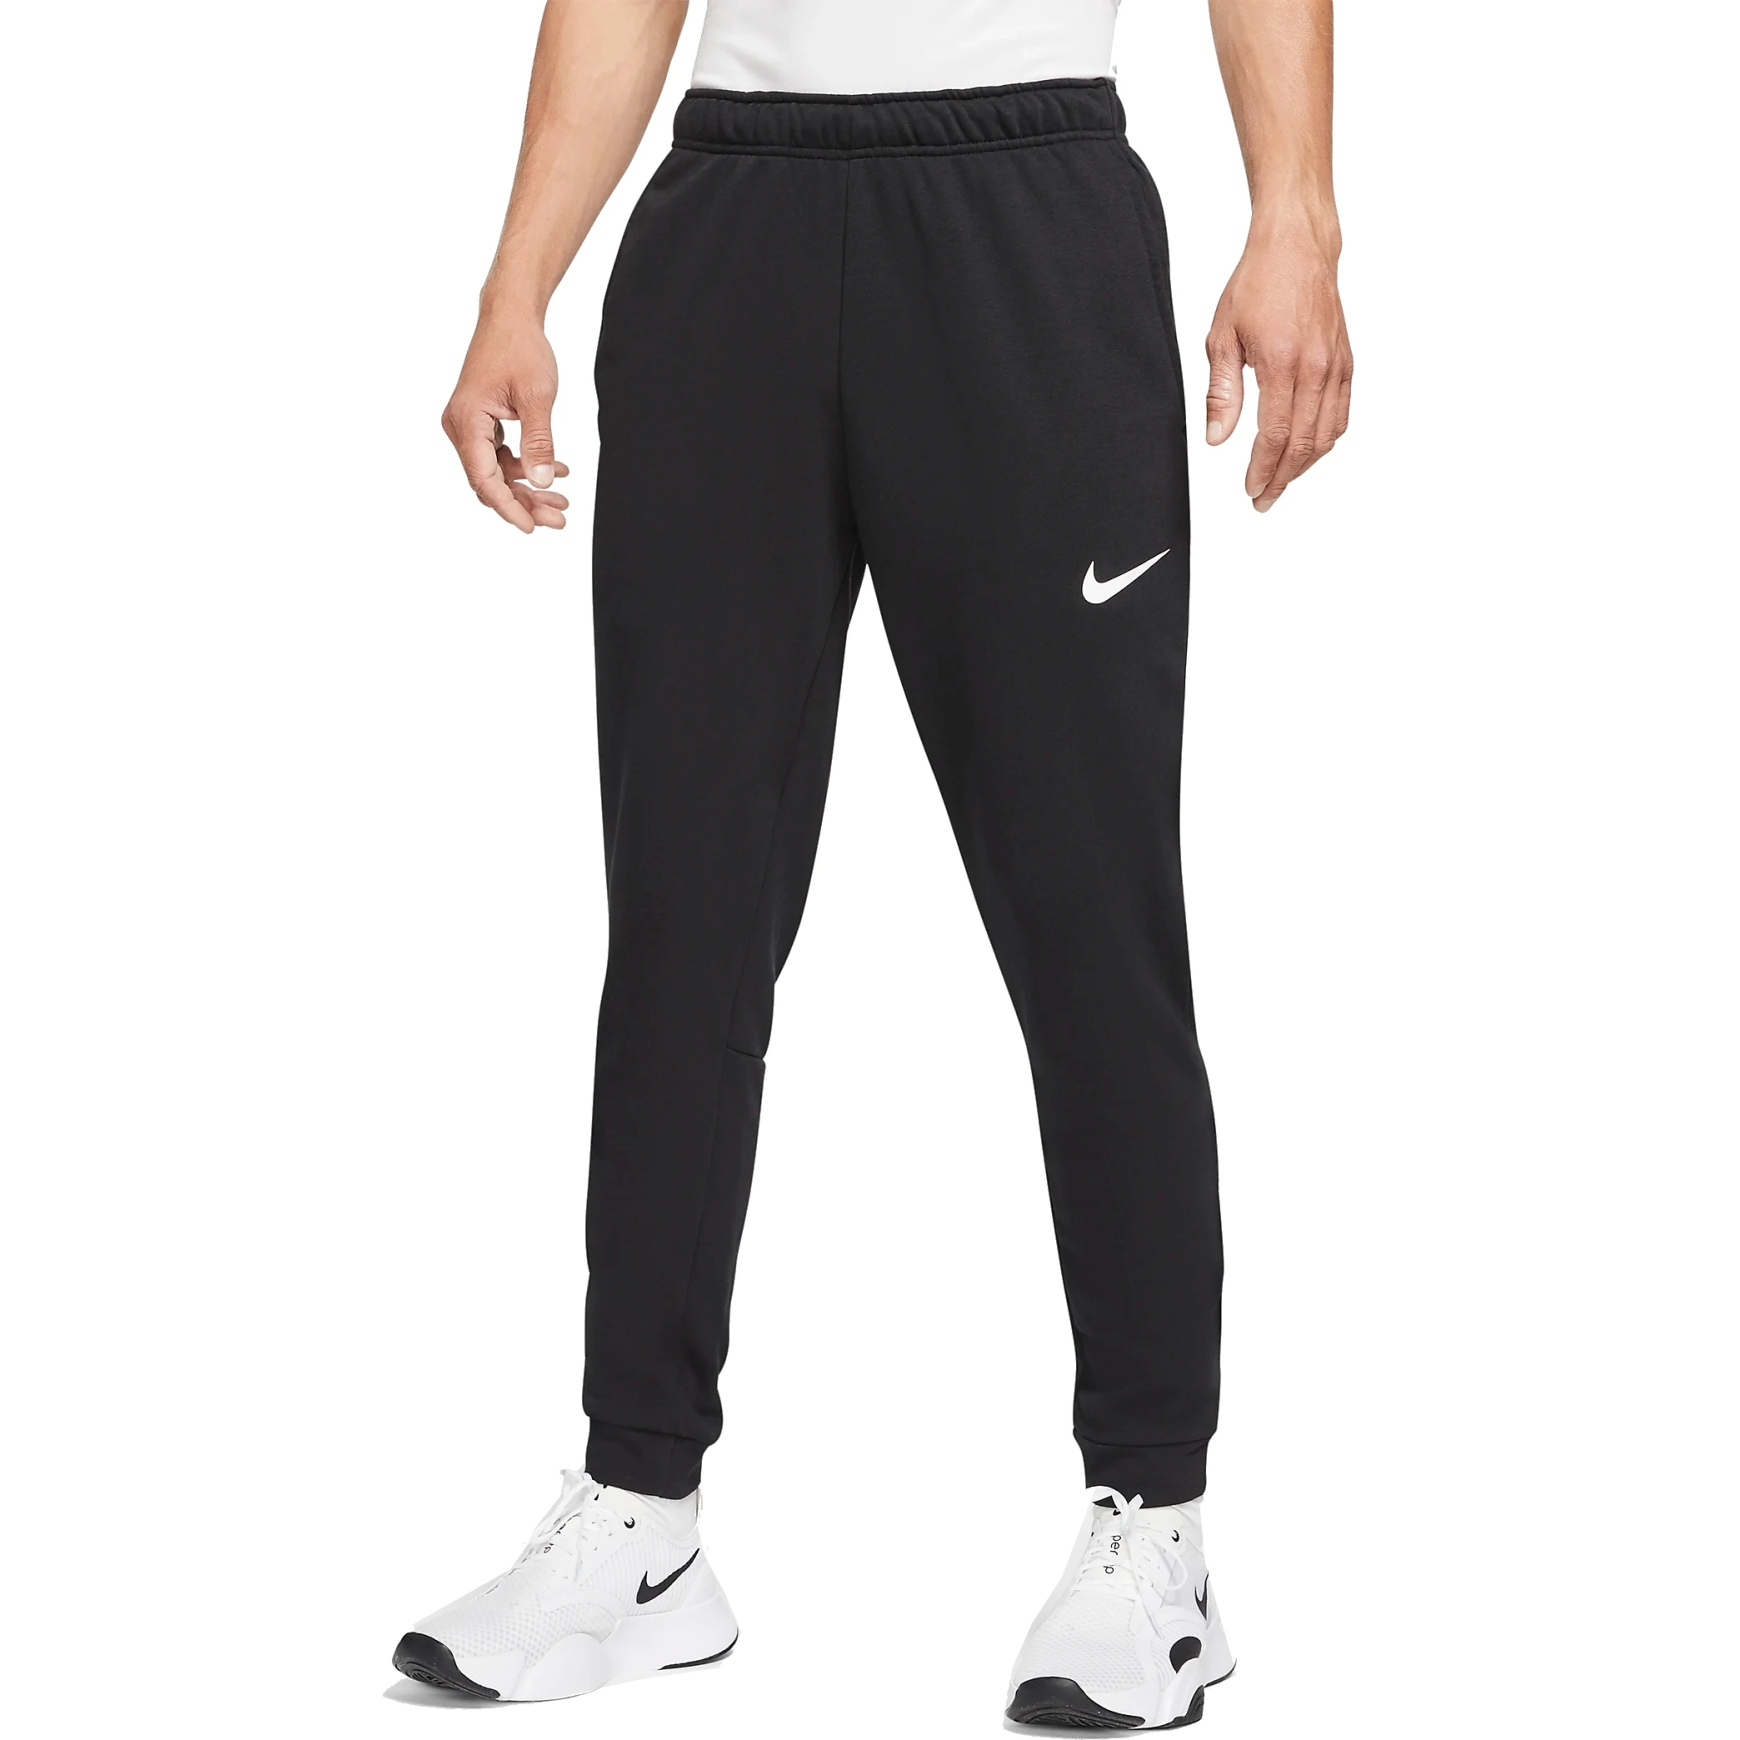 Picture of Nike Dry Tapered Training Pants Men - black/white CZ6379-010